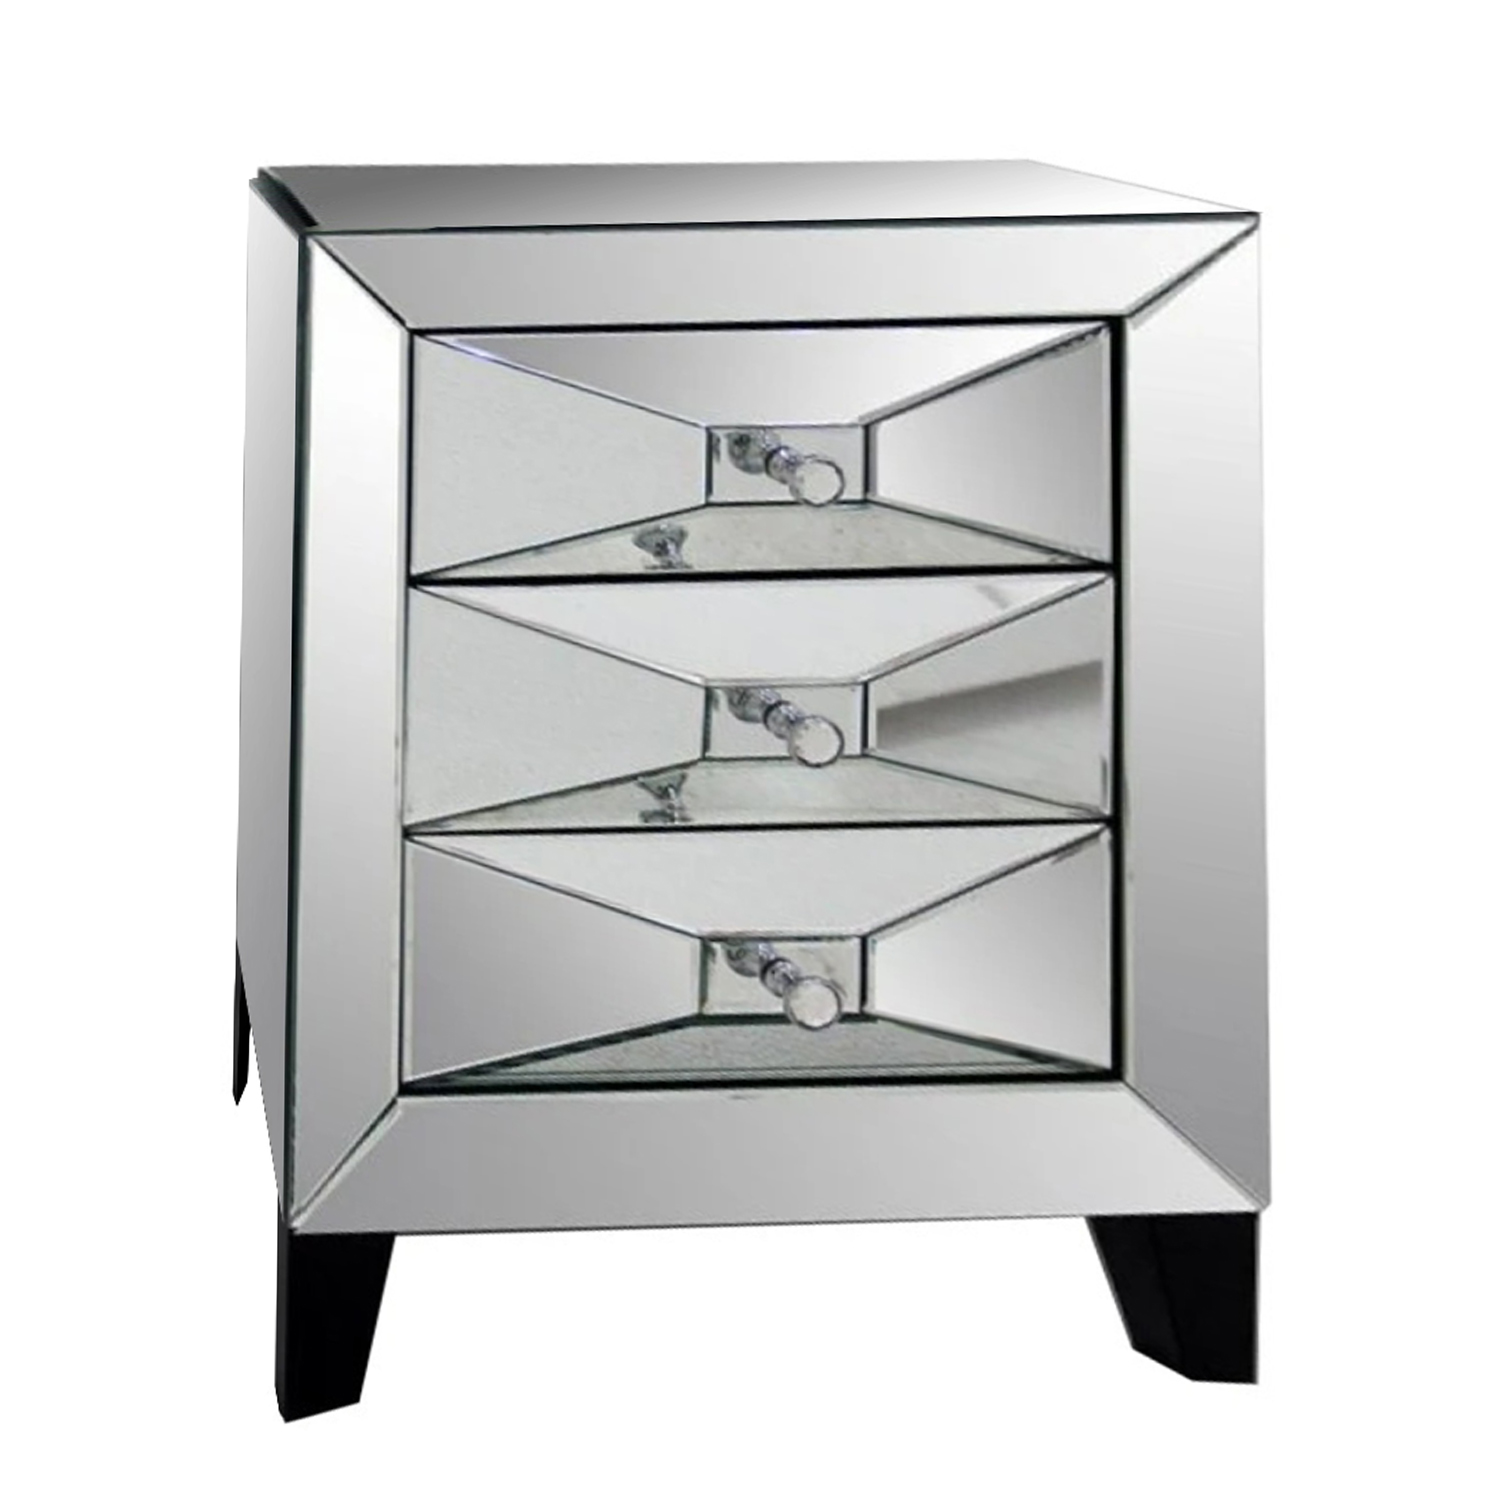 26" Glass and MDF Bedside Table with a Mirror